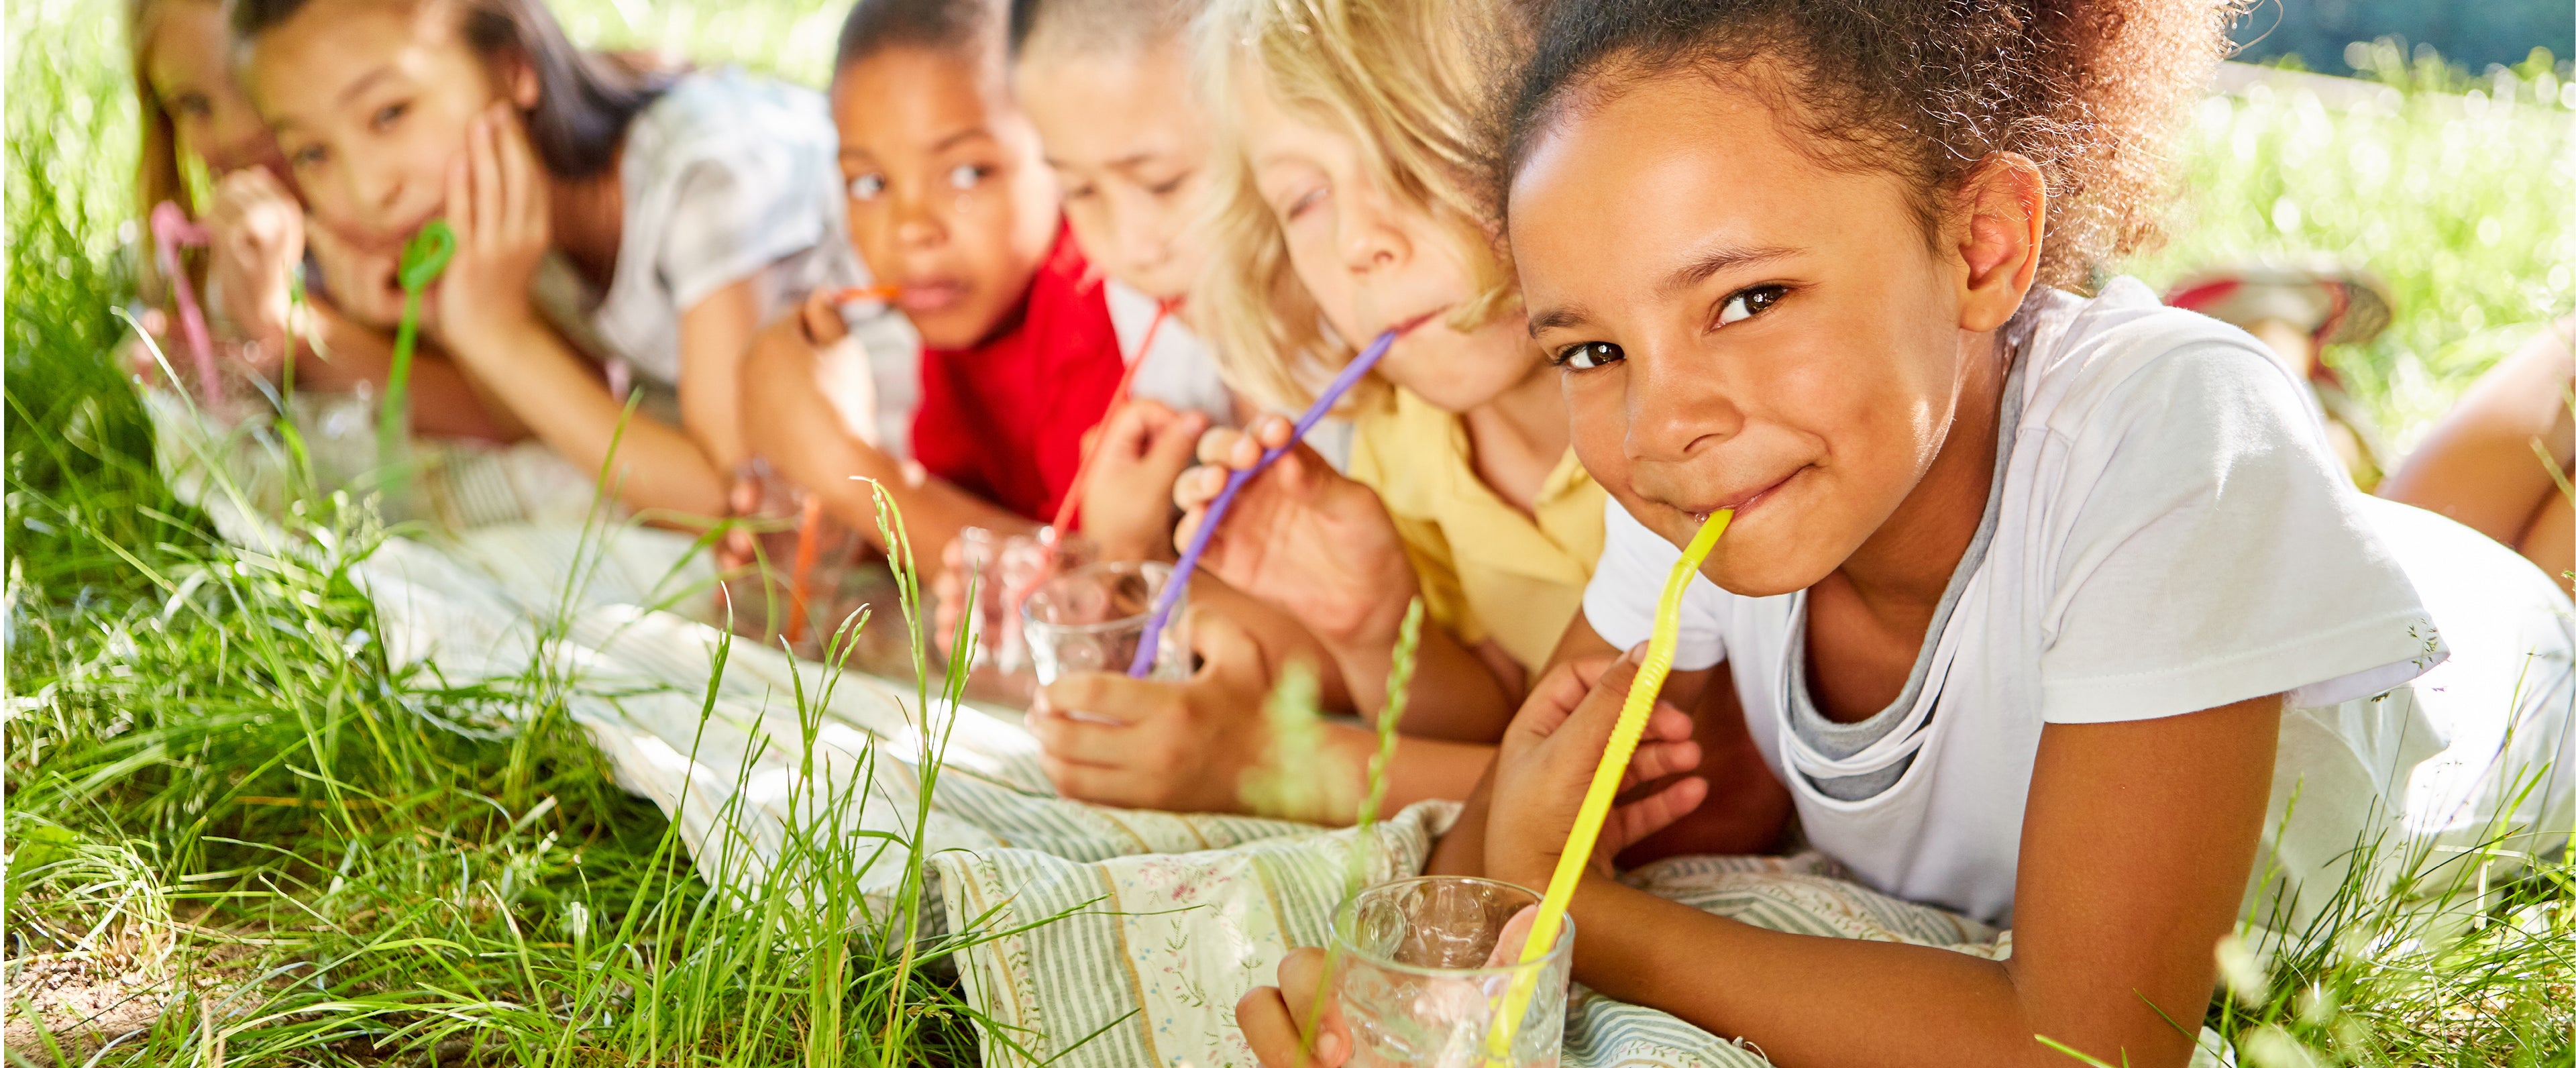 Kids drinking clean, safe water from glasses